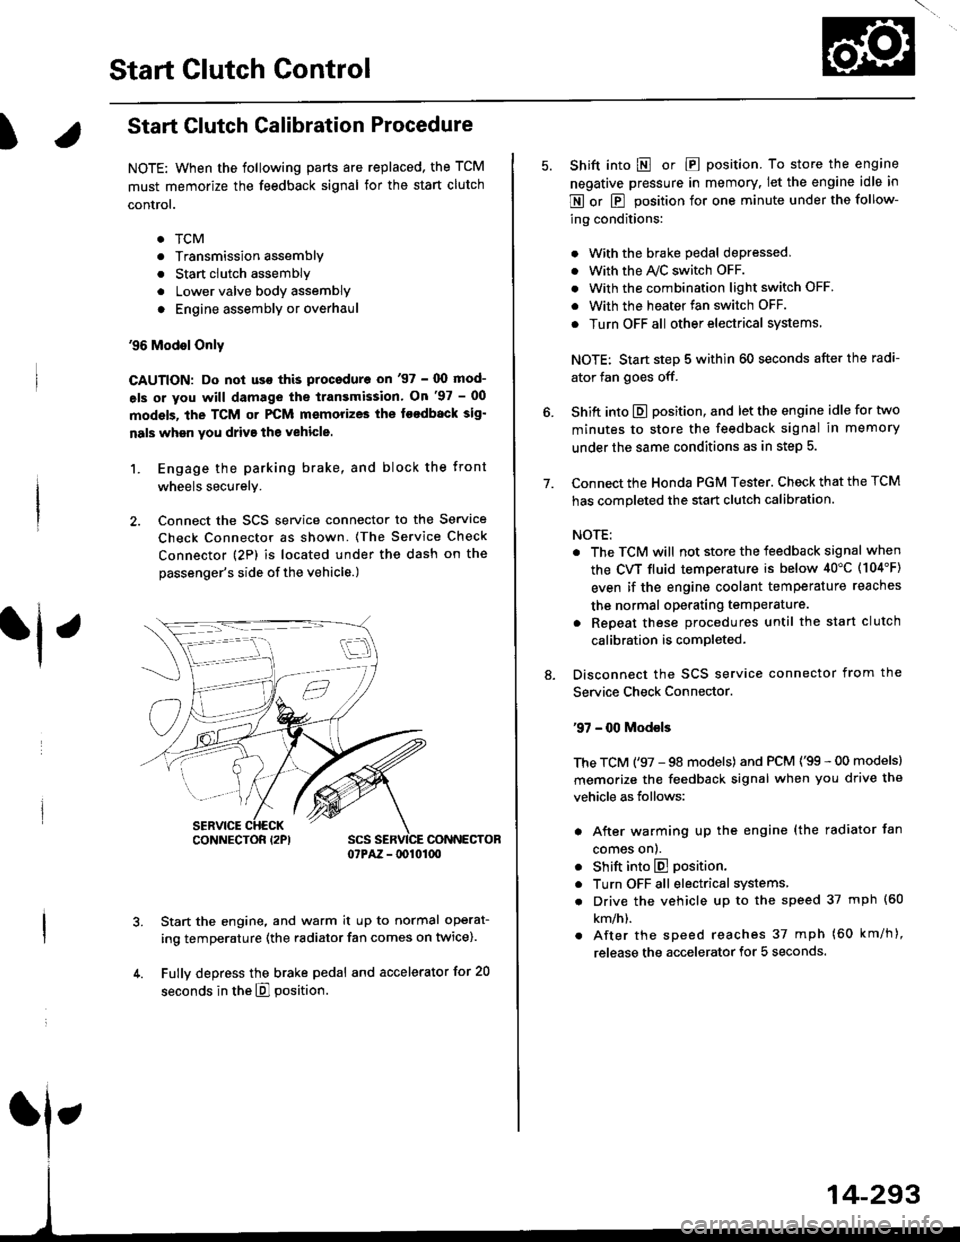 HONDA CIVIC 1996 6.G Owners Manual Start Clutch Control@
T
Start Clutch Calibration Procedure
NOTE: When the following parts are replaced, the TCM
must memorize the feedback signal for the start clutch
control.
. TCM
. Transmissionasse